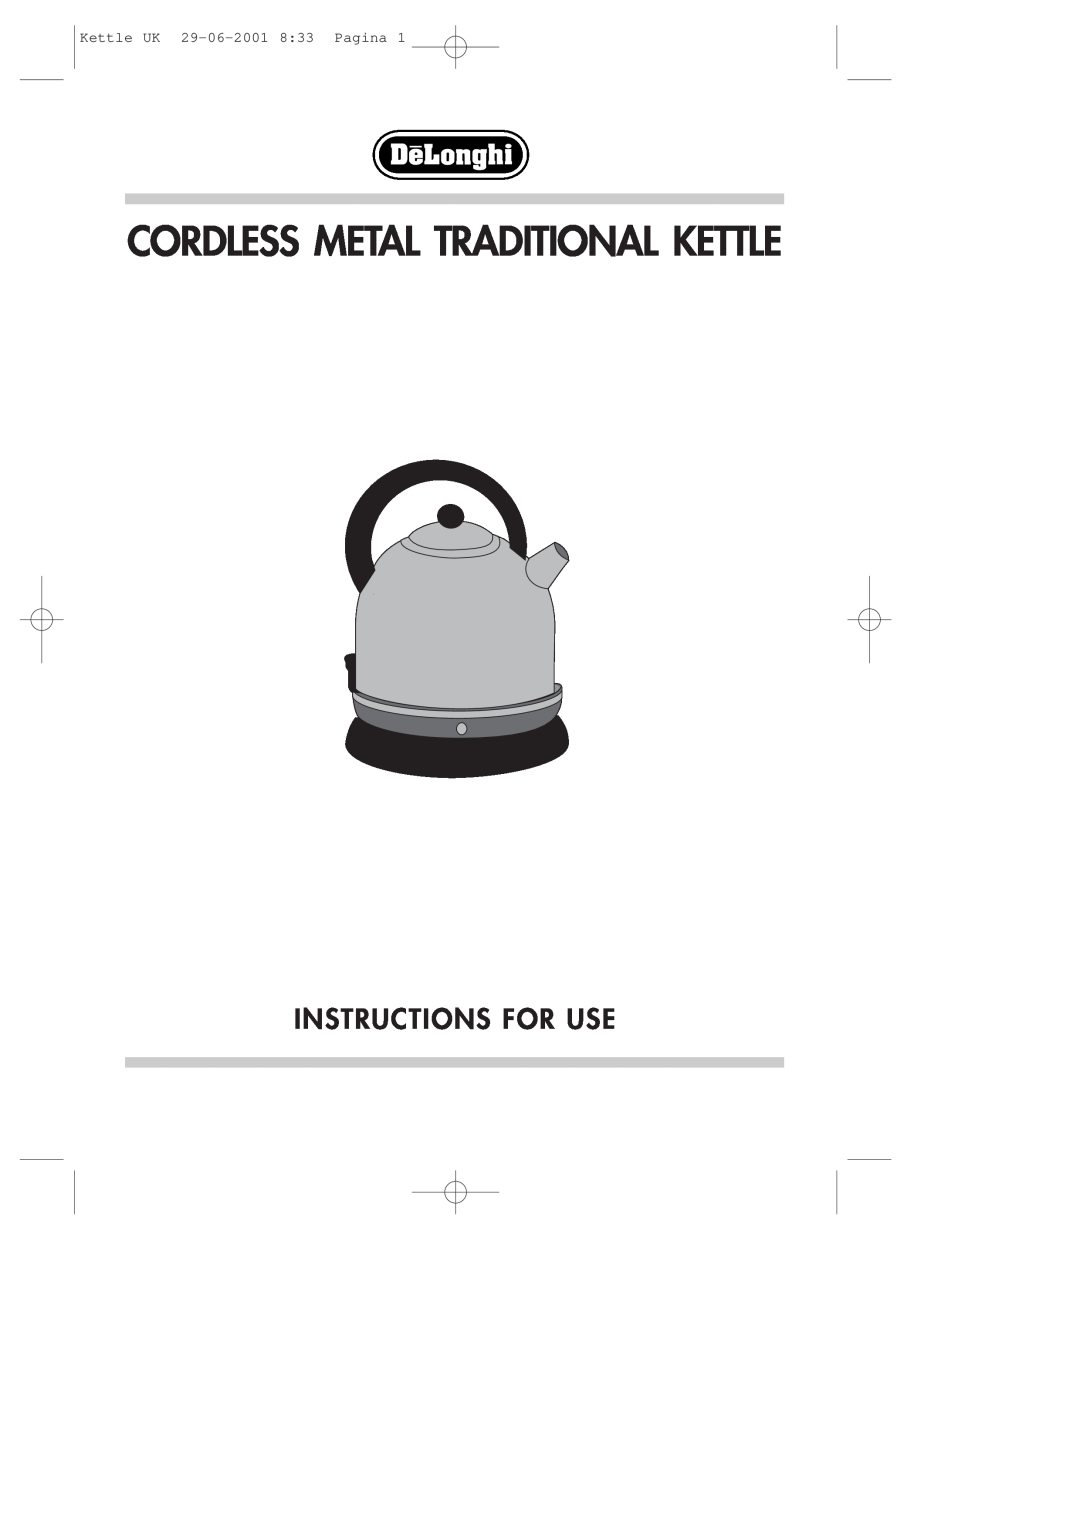 DeLonghi manual Cordless Metal Traditional Kettle, Instructions For Use, Kettle UK 29-06-2001 833 Pagina 